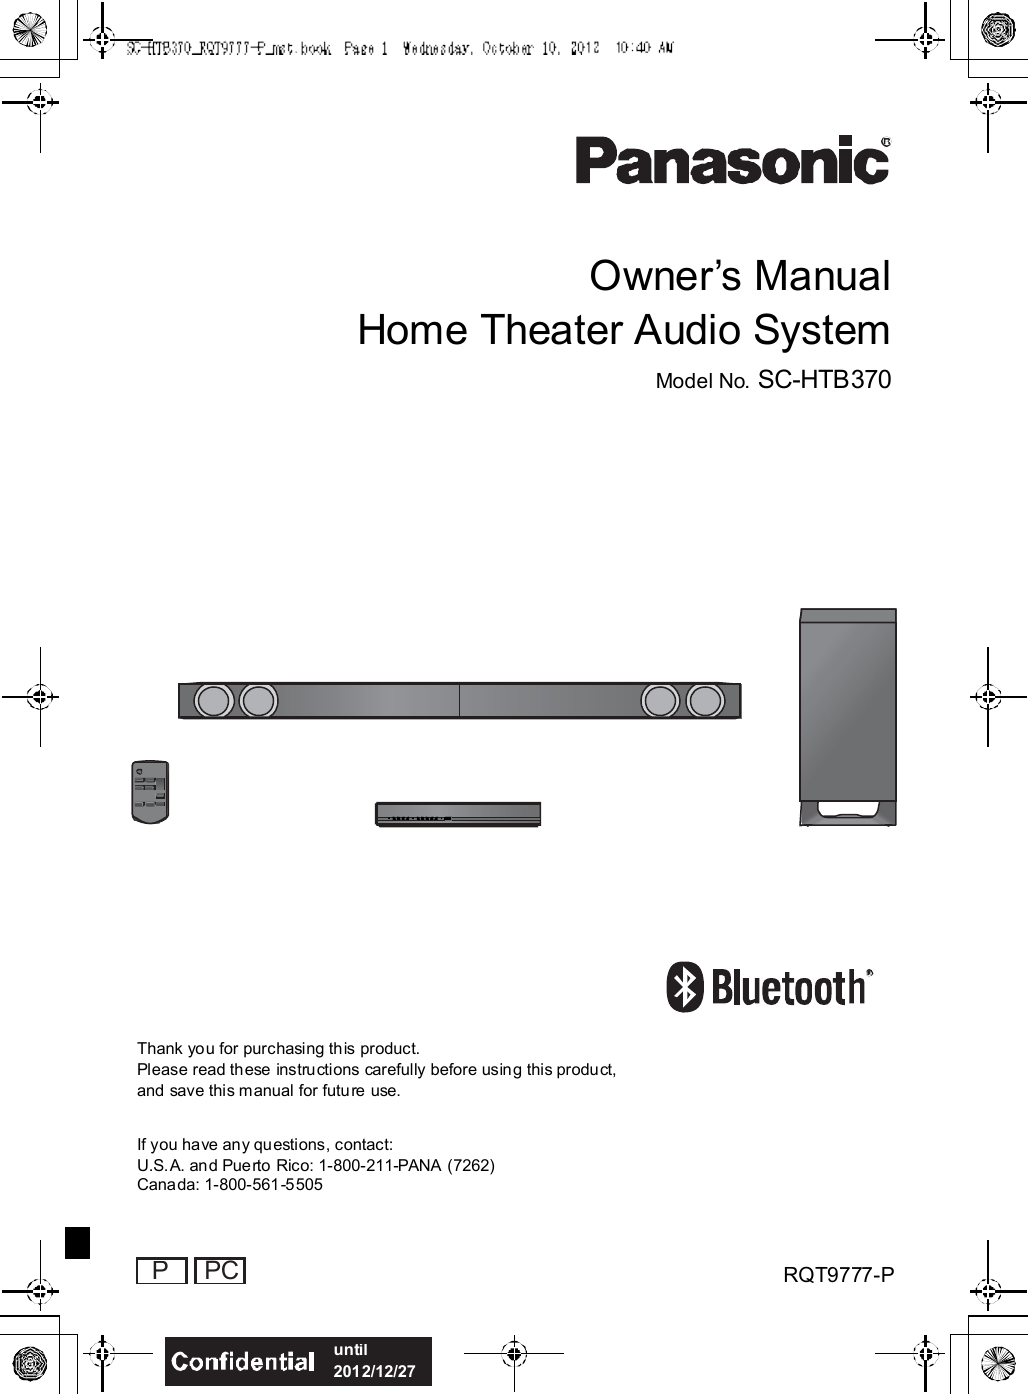 Owners ManualHome Theater Audio SystemModel No. SC-HTB370Thank you for purchasing this product.Please read these instructions carefully before using this product,and save this manual for future use.If you have any questions, contact:U.S.A. and Puerto Rico: 1-800-211-PANA (7262)Canada: 1-800-561-5505RQT9777-P